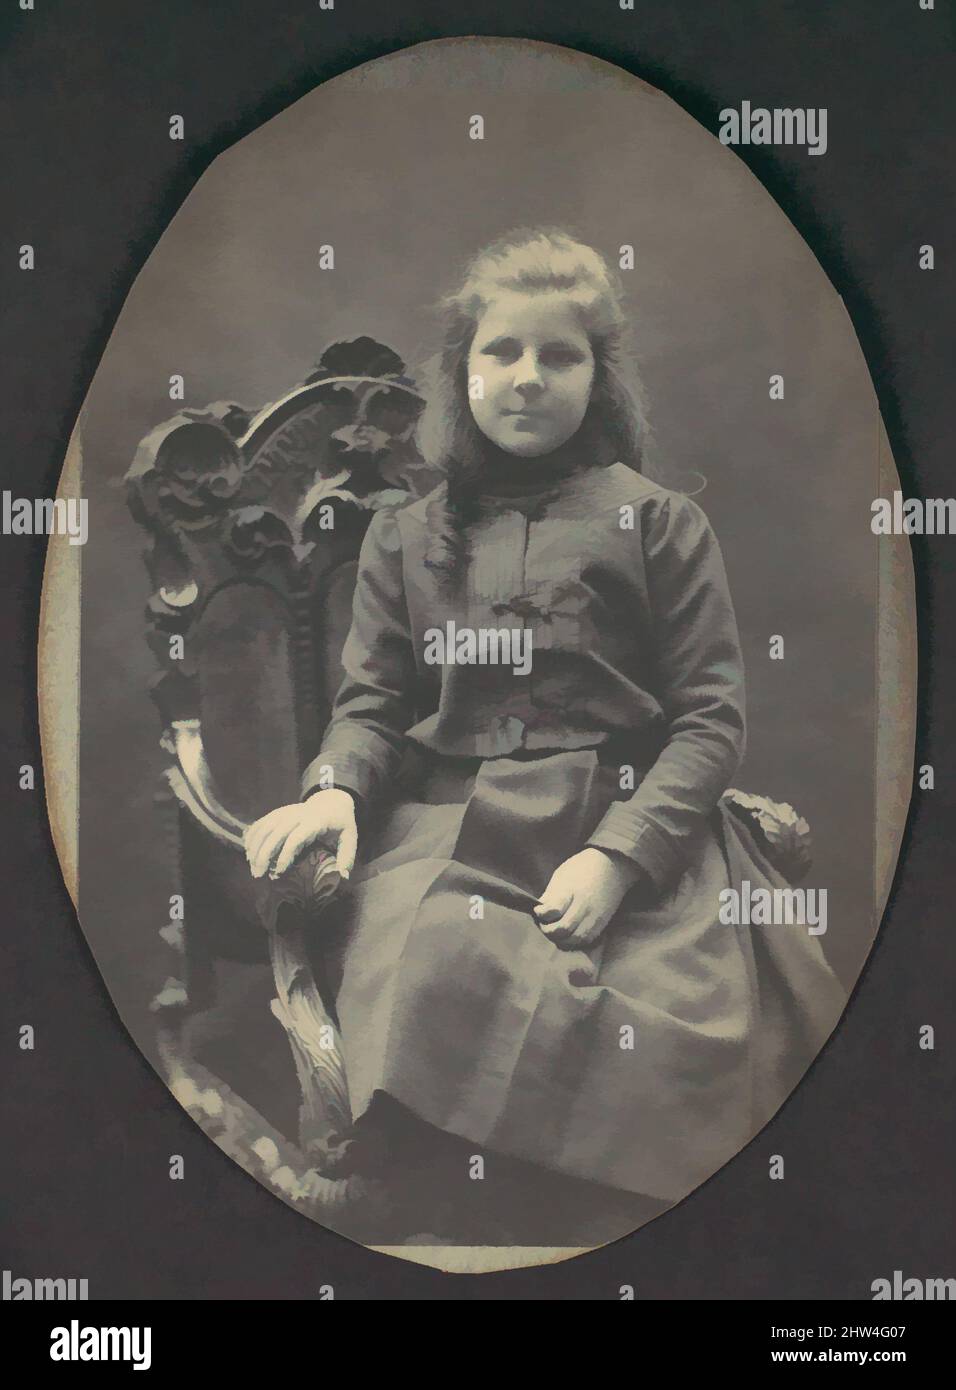 Art inspired by Girl with Ringlets, Seated, Three-Quarter Length, 1890s, Gelatin silver print, 14.2 x 9.7 cm. (5 9/16 x 3 13/16 in.), Photographs, Frederick Gutekunst (American, born Germany, 1832–1917, Classic works modernized by Artotop with a splash of modernity. Shapes, color and value, eye-catching visual impact on art. Emotions through freedom of artworks in a contemporary way. A timeless message pursuing a wildly creative new direction. Artists turning to the digital medium and creating the Artotop NFT Stock Photo